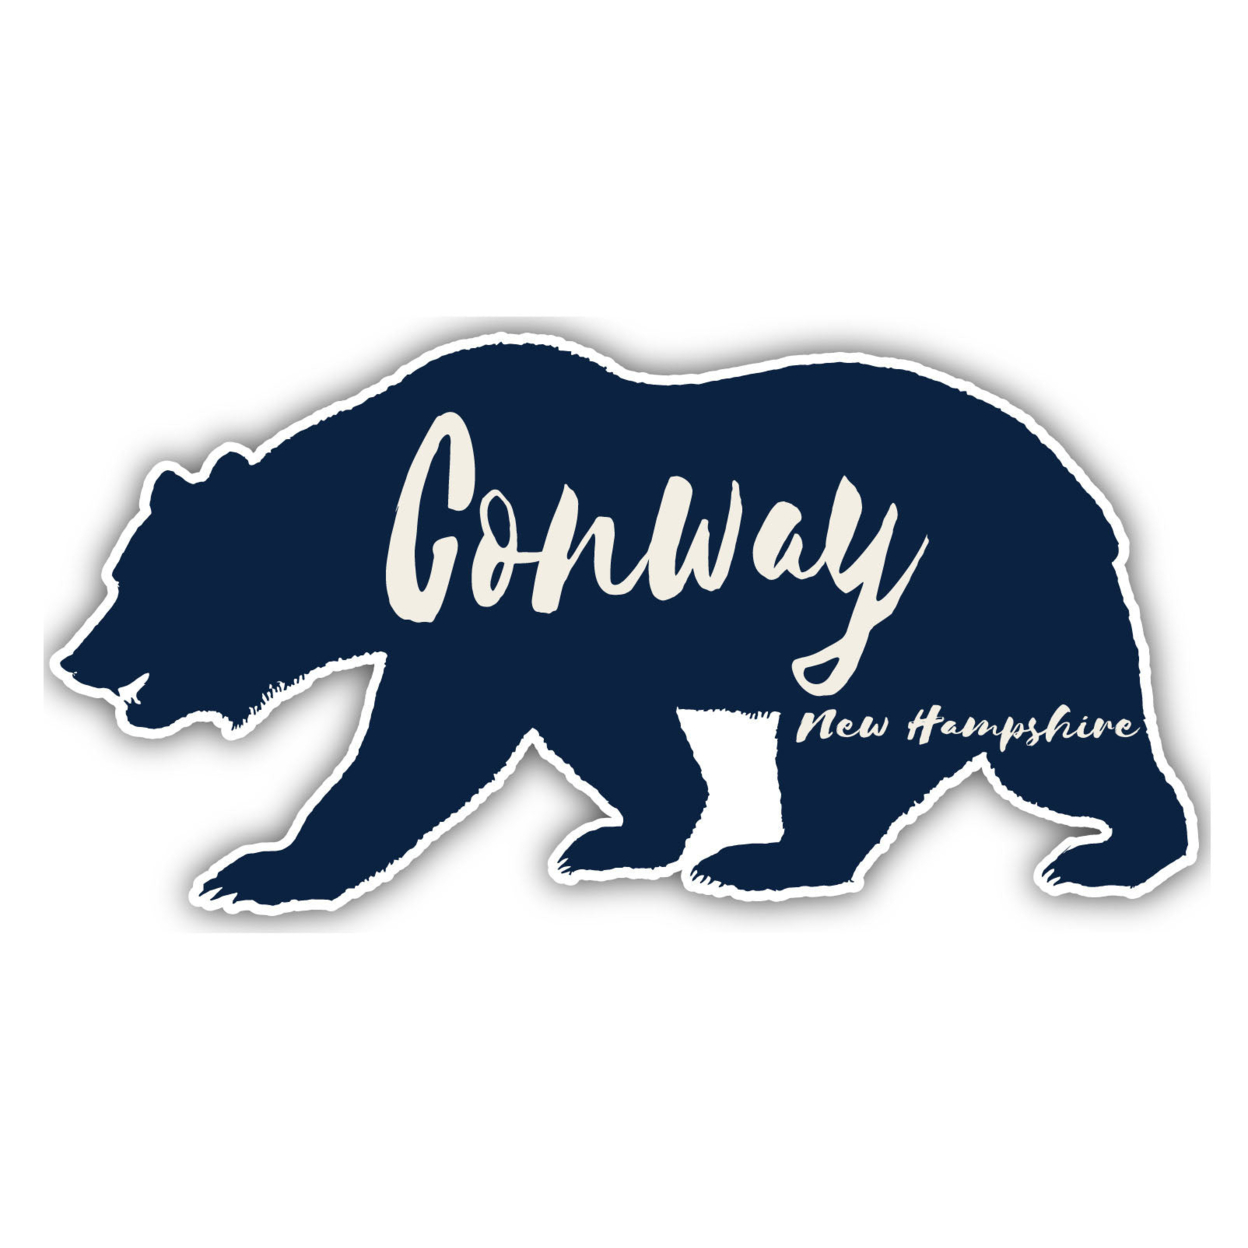 Conway New Hampshire Souvenir Decorative Stickers (Choose Theme And Size) - 4-Pack, 8-Inch, Great Outdoors